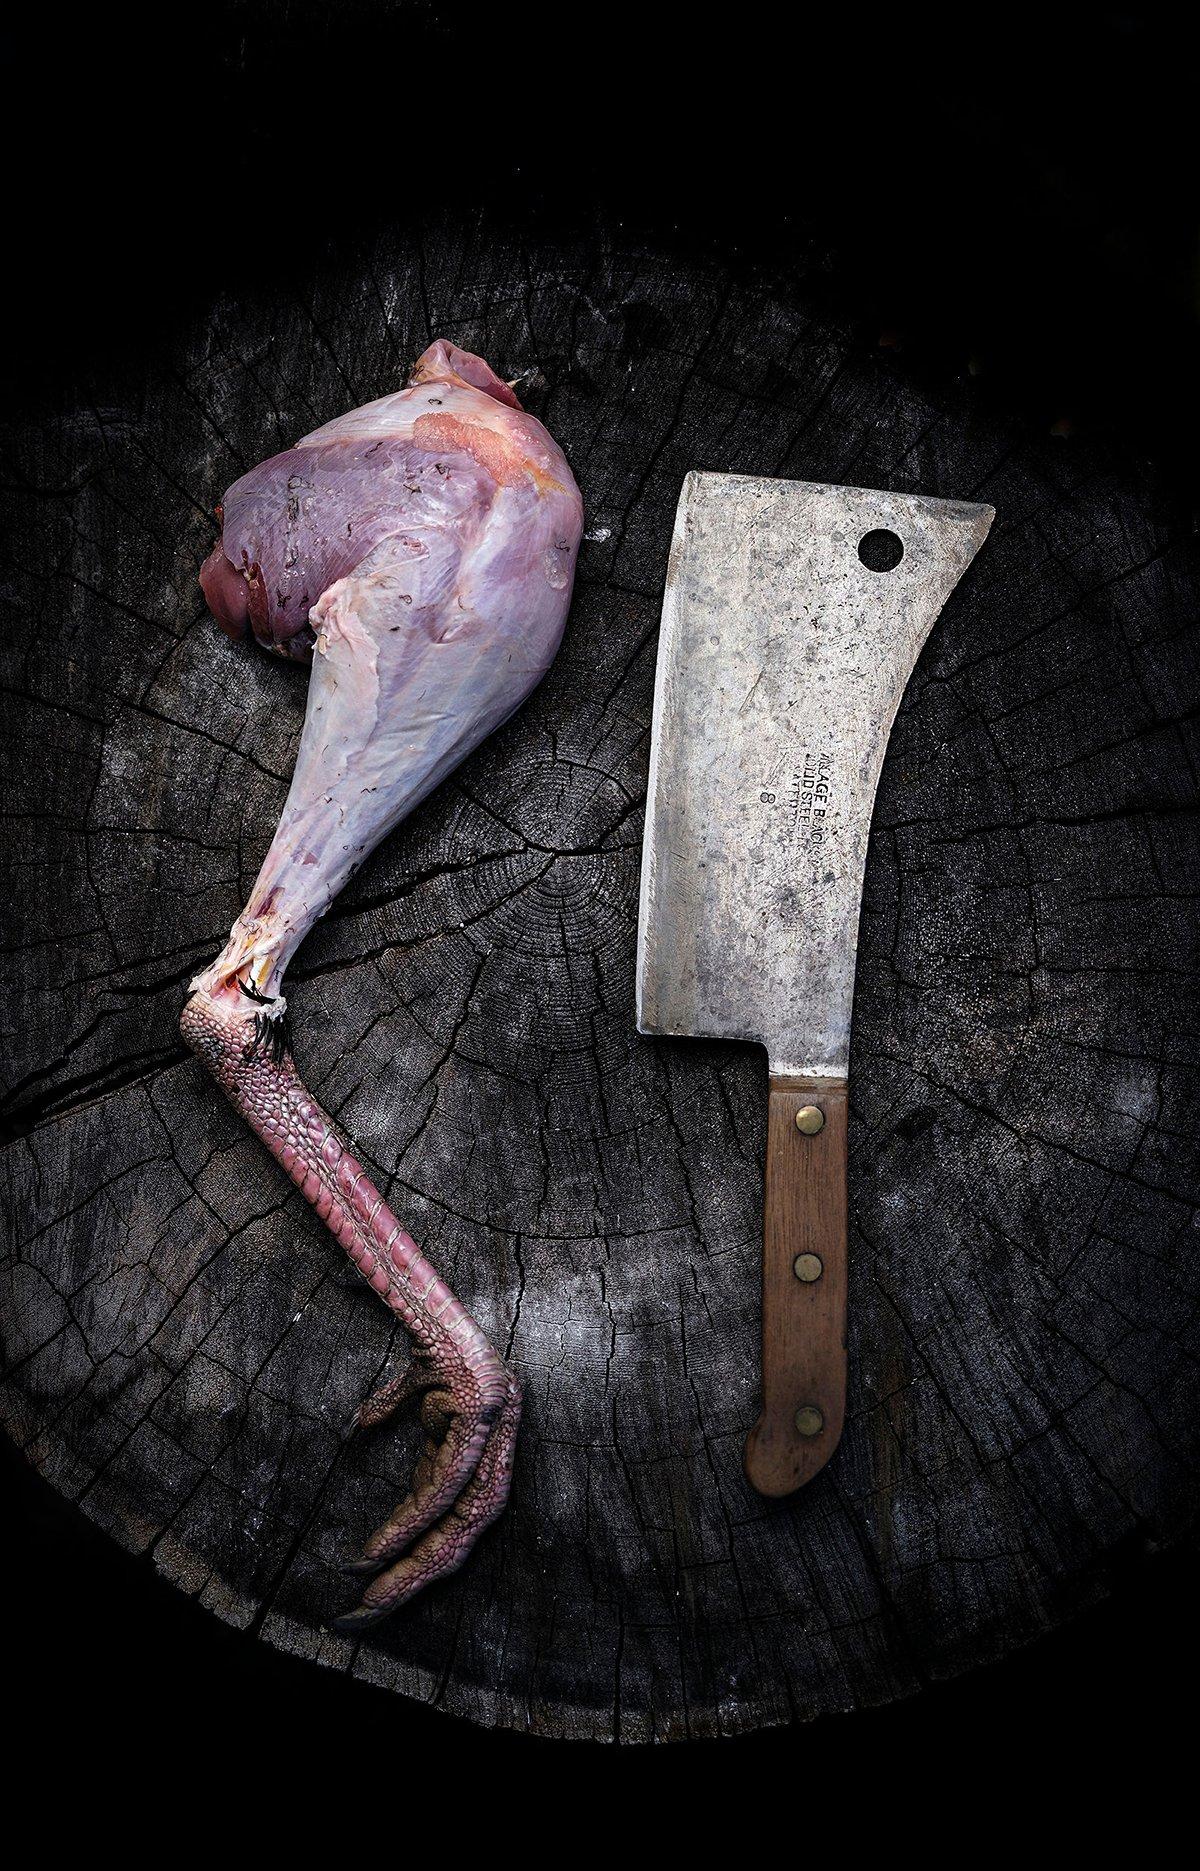 With a bit of extra prep, wild turkey legs can make a tender, delicious meal. Image by Grit Media